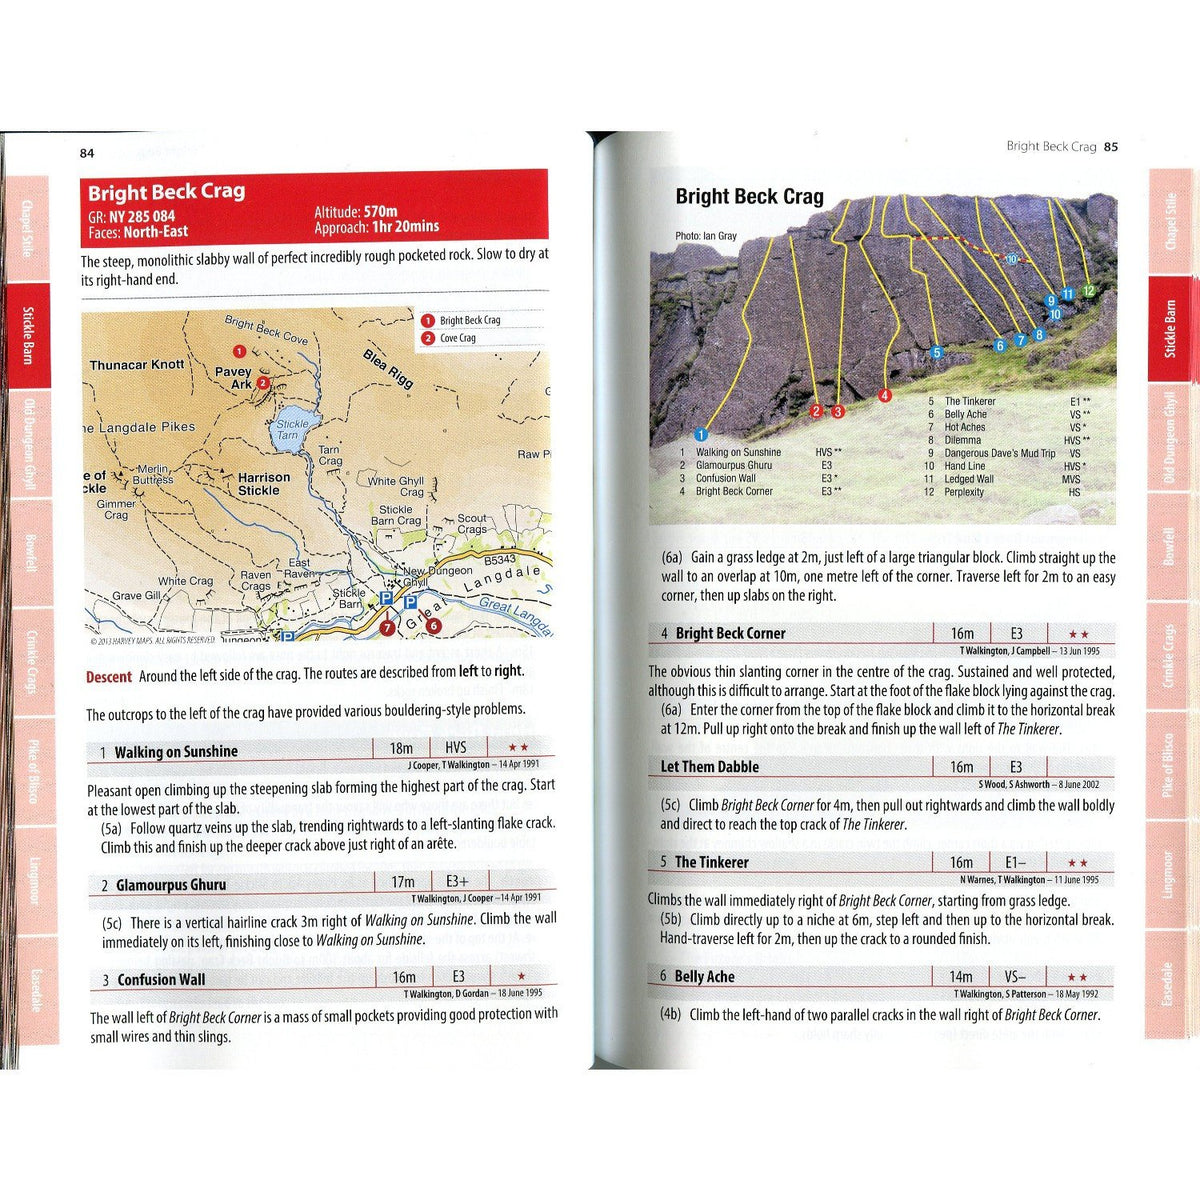 Langdale (FRCC) guide, example inside pages showing topos and route descriptions